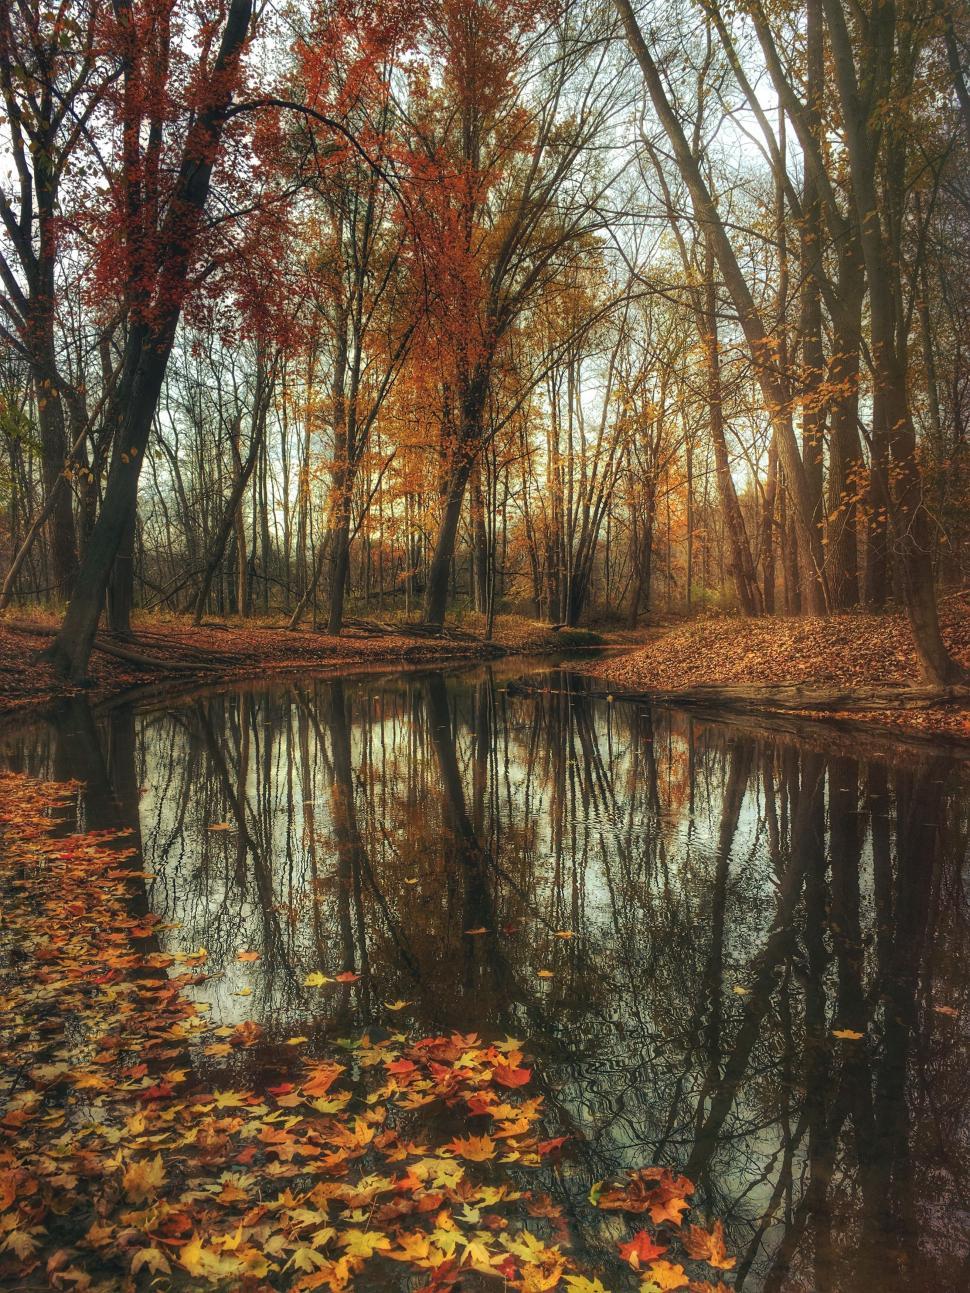 Free Image of Pond Surrounded by Trees in Autumn 